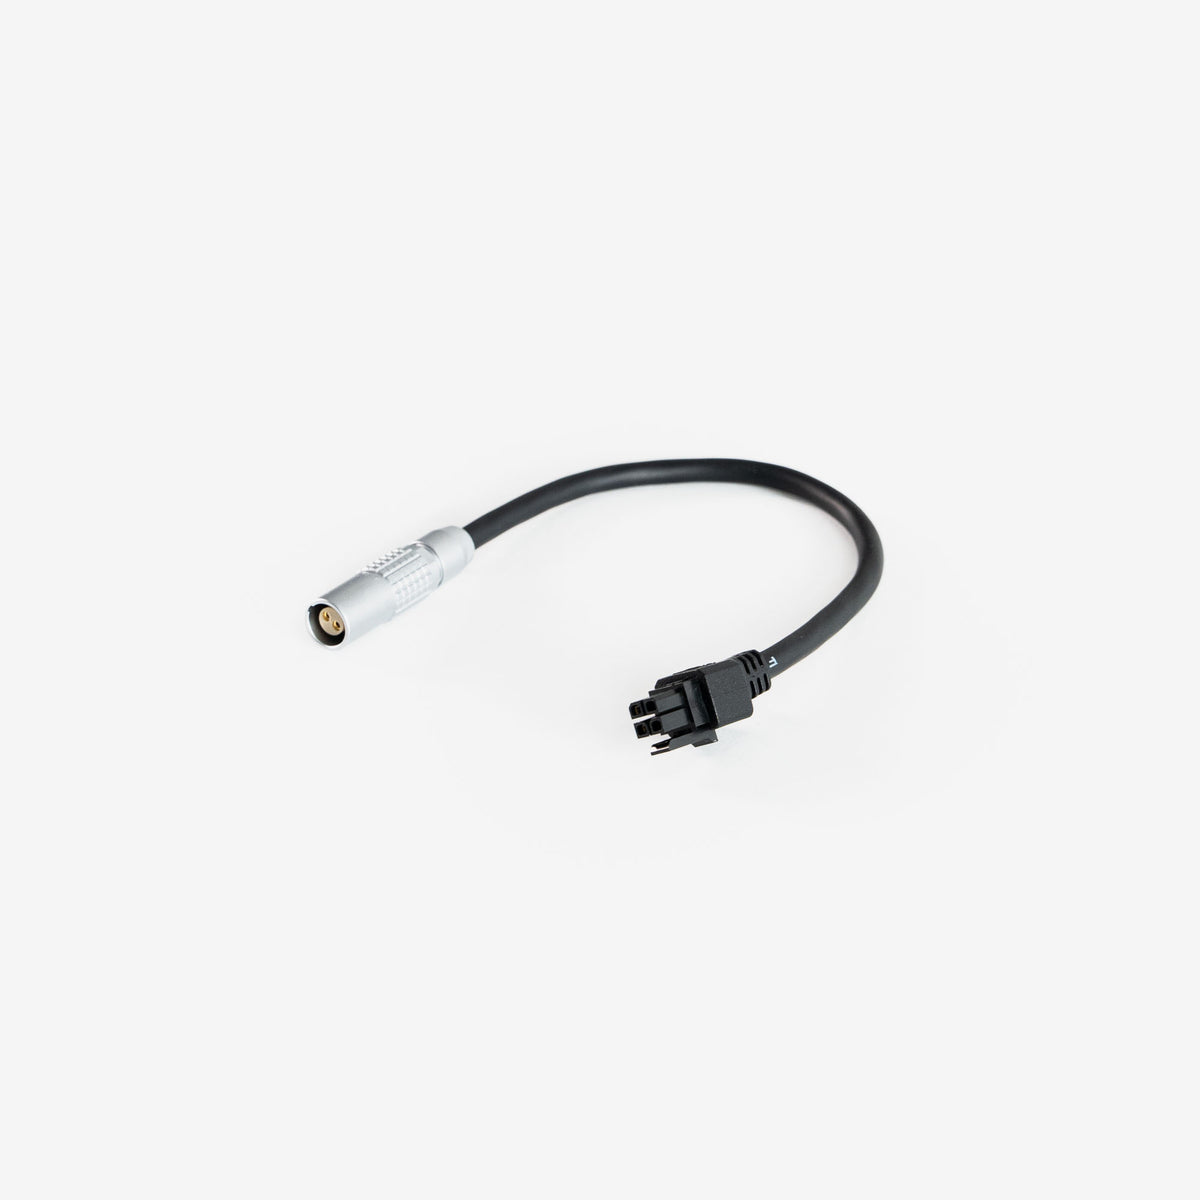 SL4 Accessory Power Cable